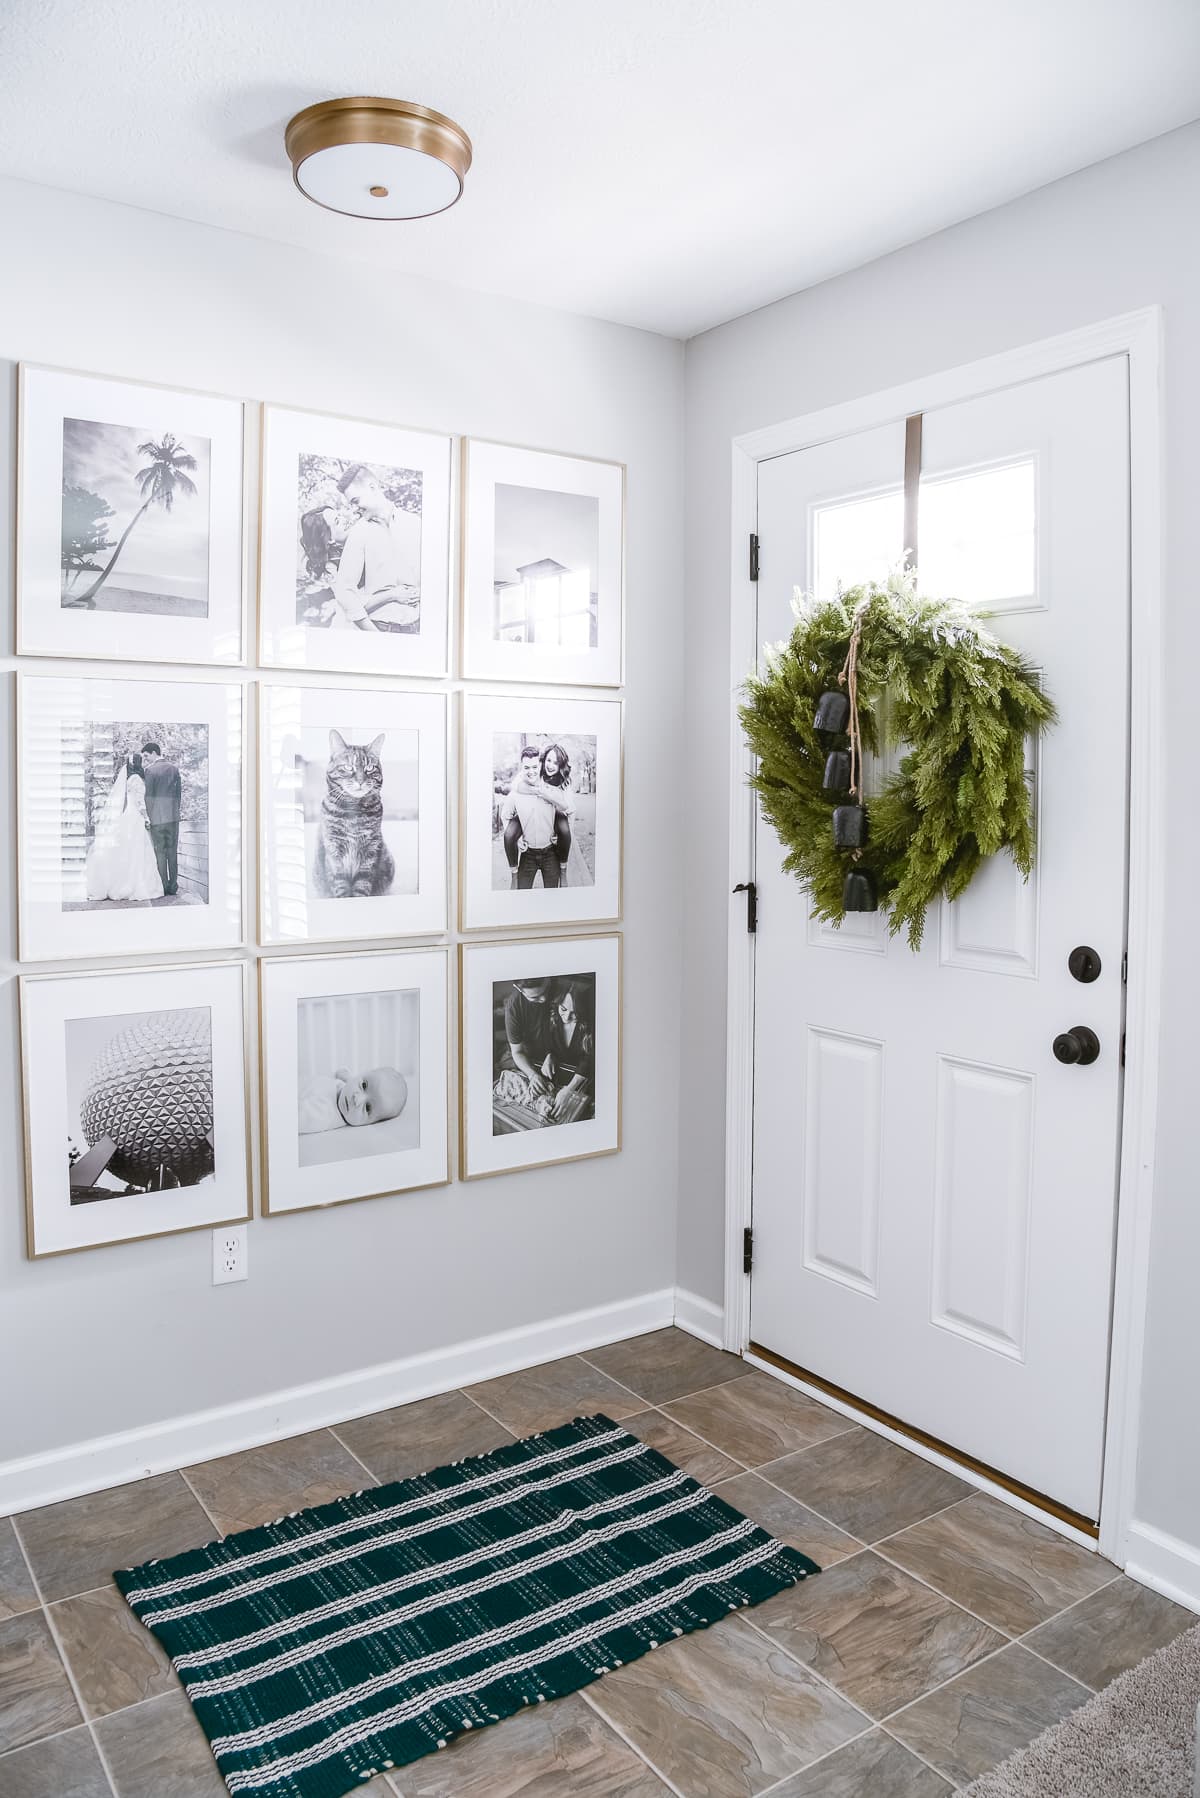 How To Create A Picture Wall / Gallery Wall - Step By Step